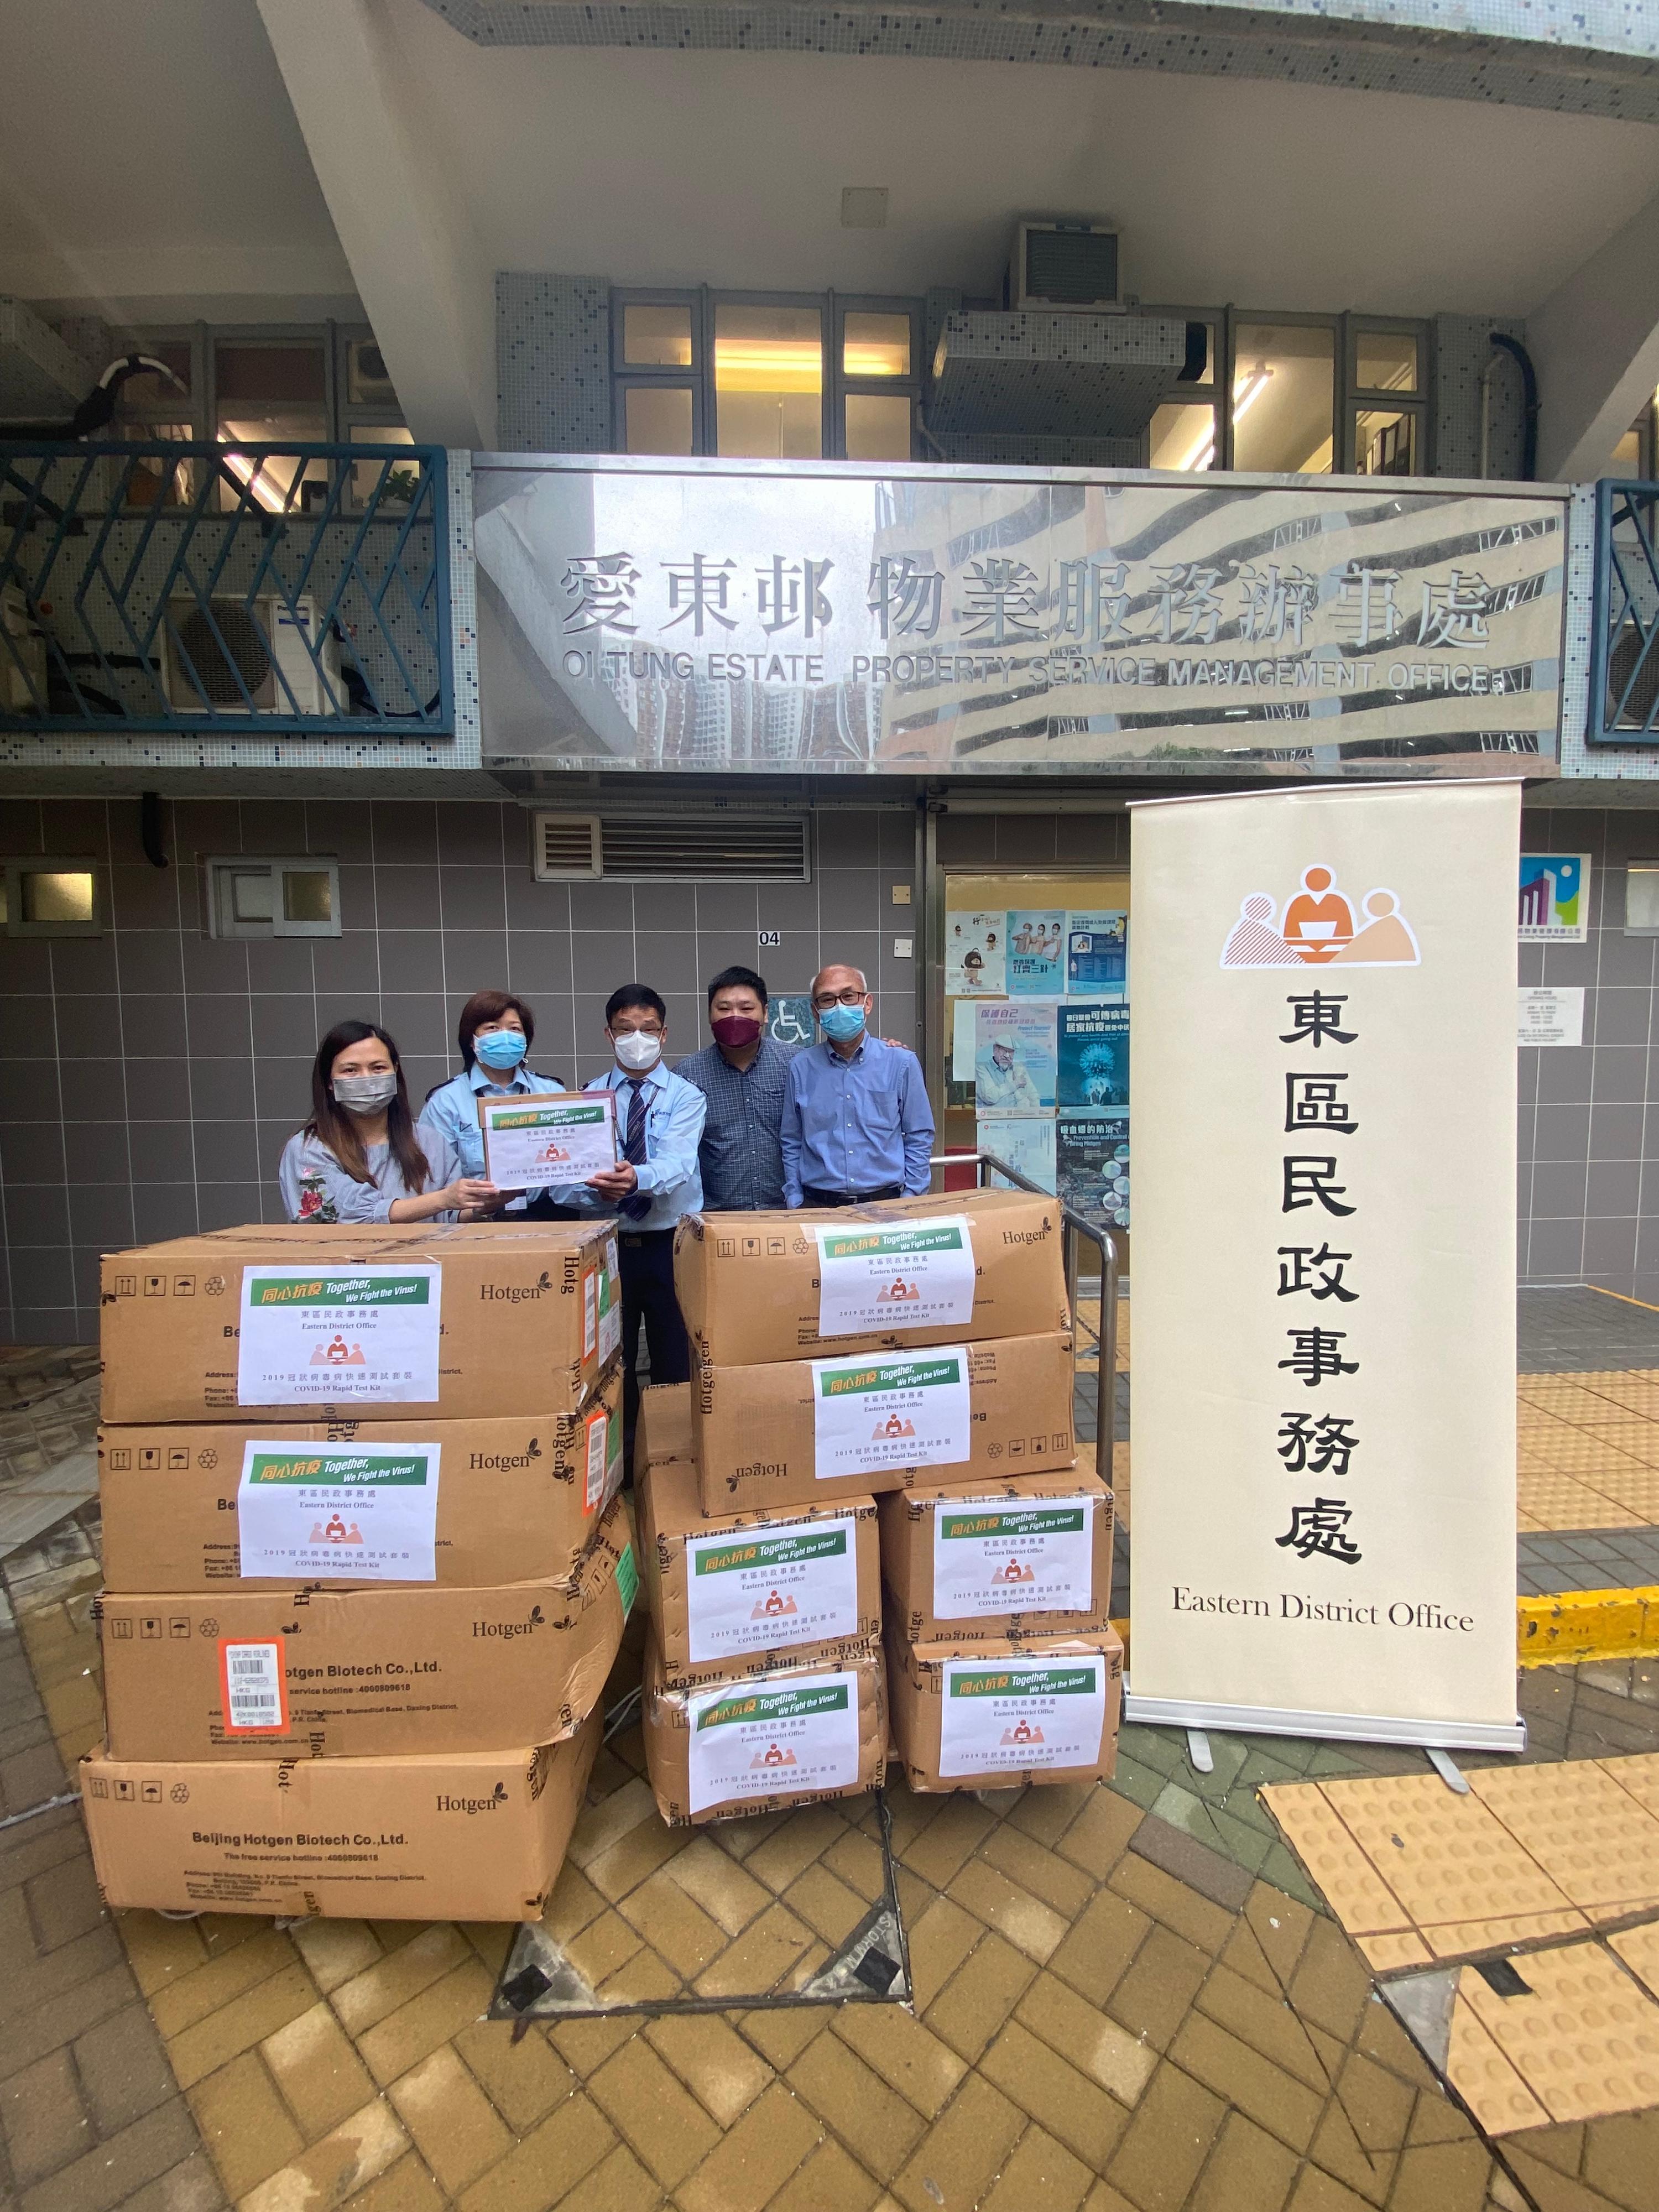 The Eastern District Office today (April 19) distributed COVID-19 rapid test kits to households, cleansing workers and property management staff living and working in Oi Tung Estate for voluntary testing through the Housing Department and the property management company.